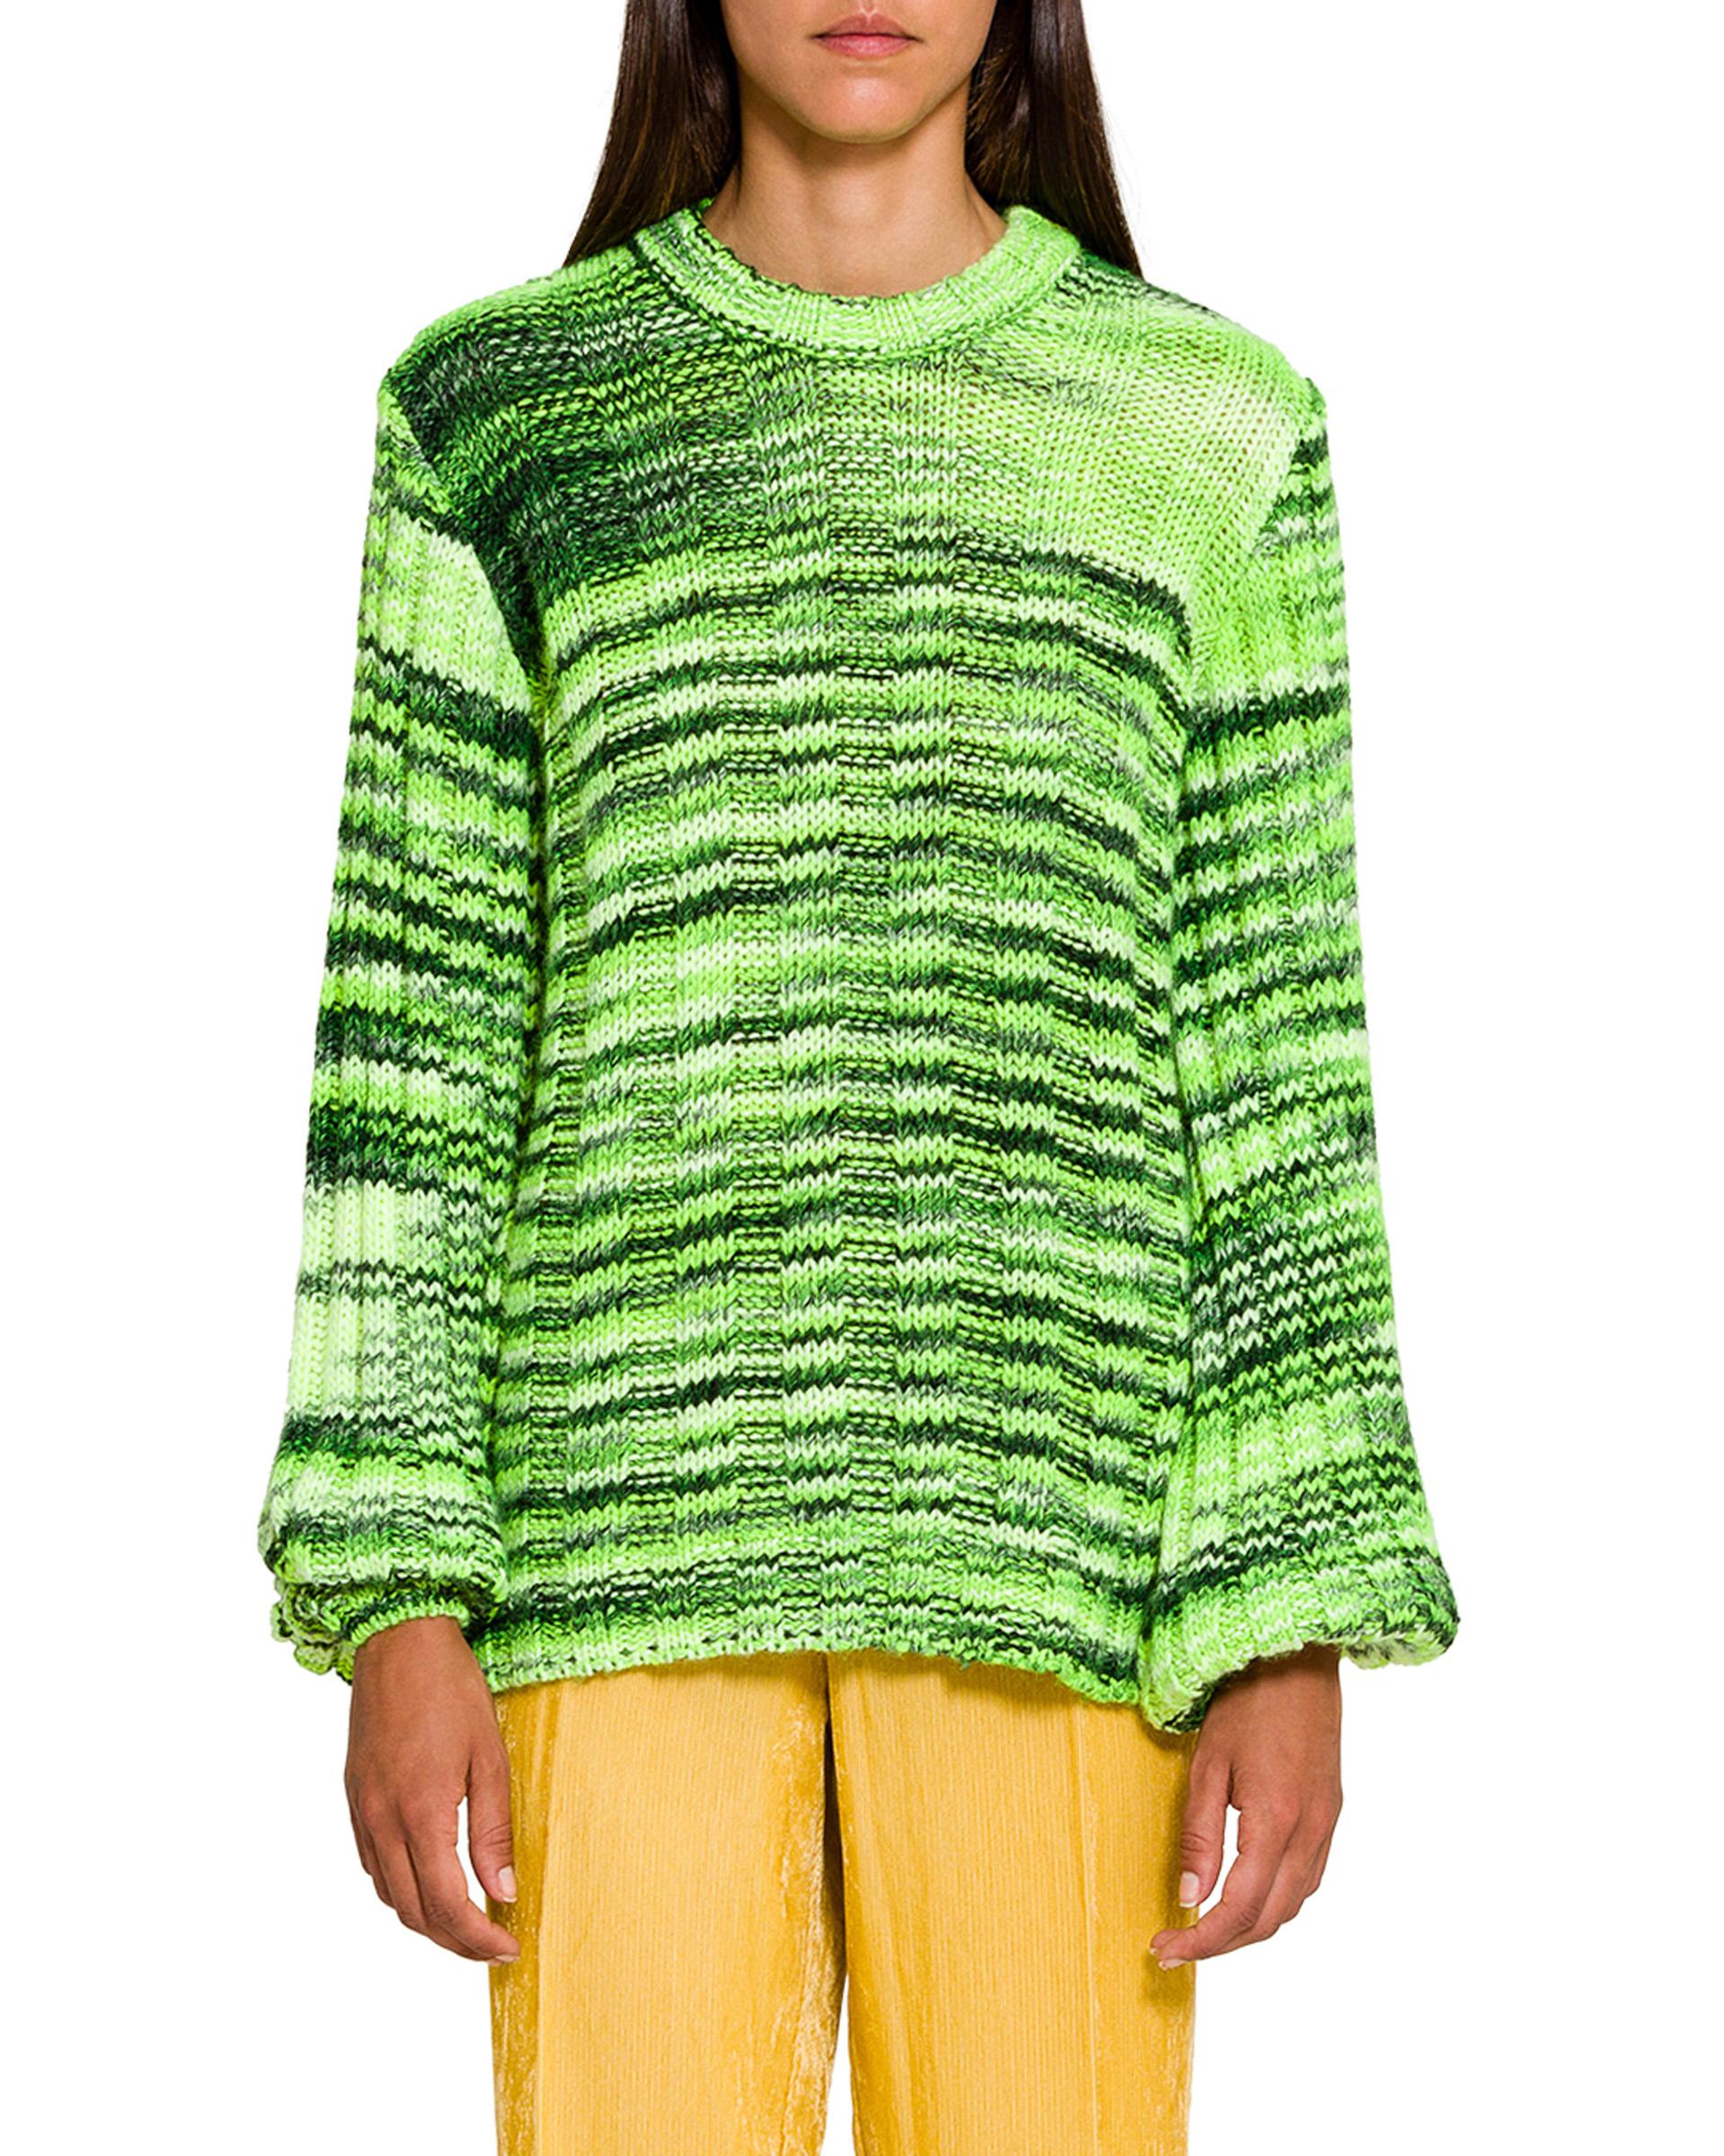 Ganni Wool Mixed Neon Sweater in Green - Save 16% - Lyst